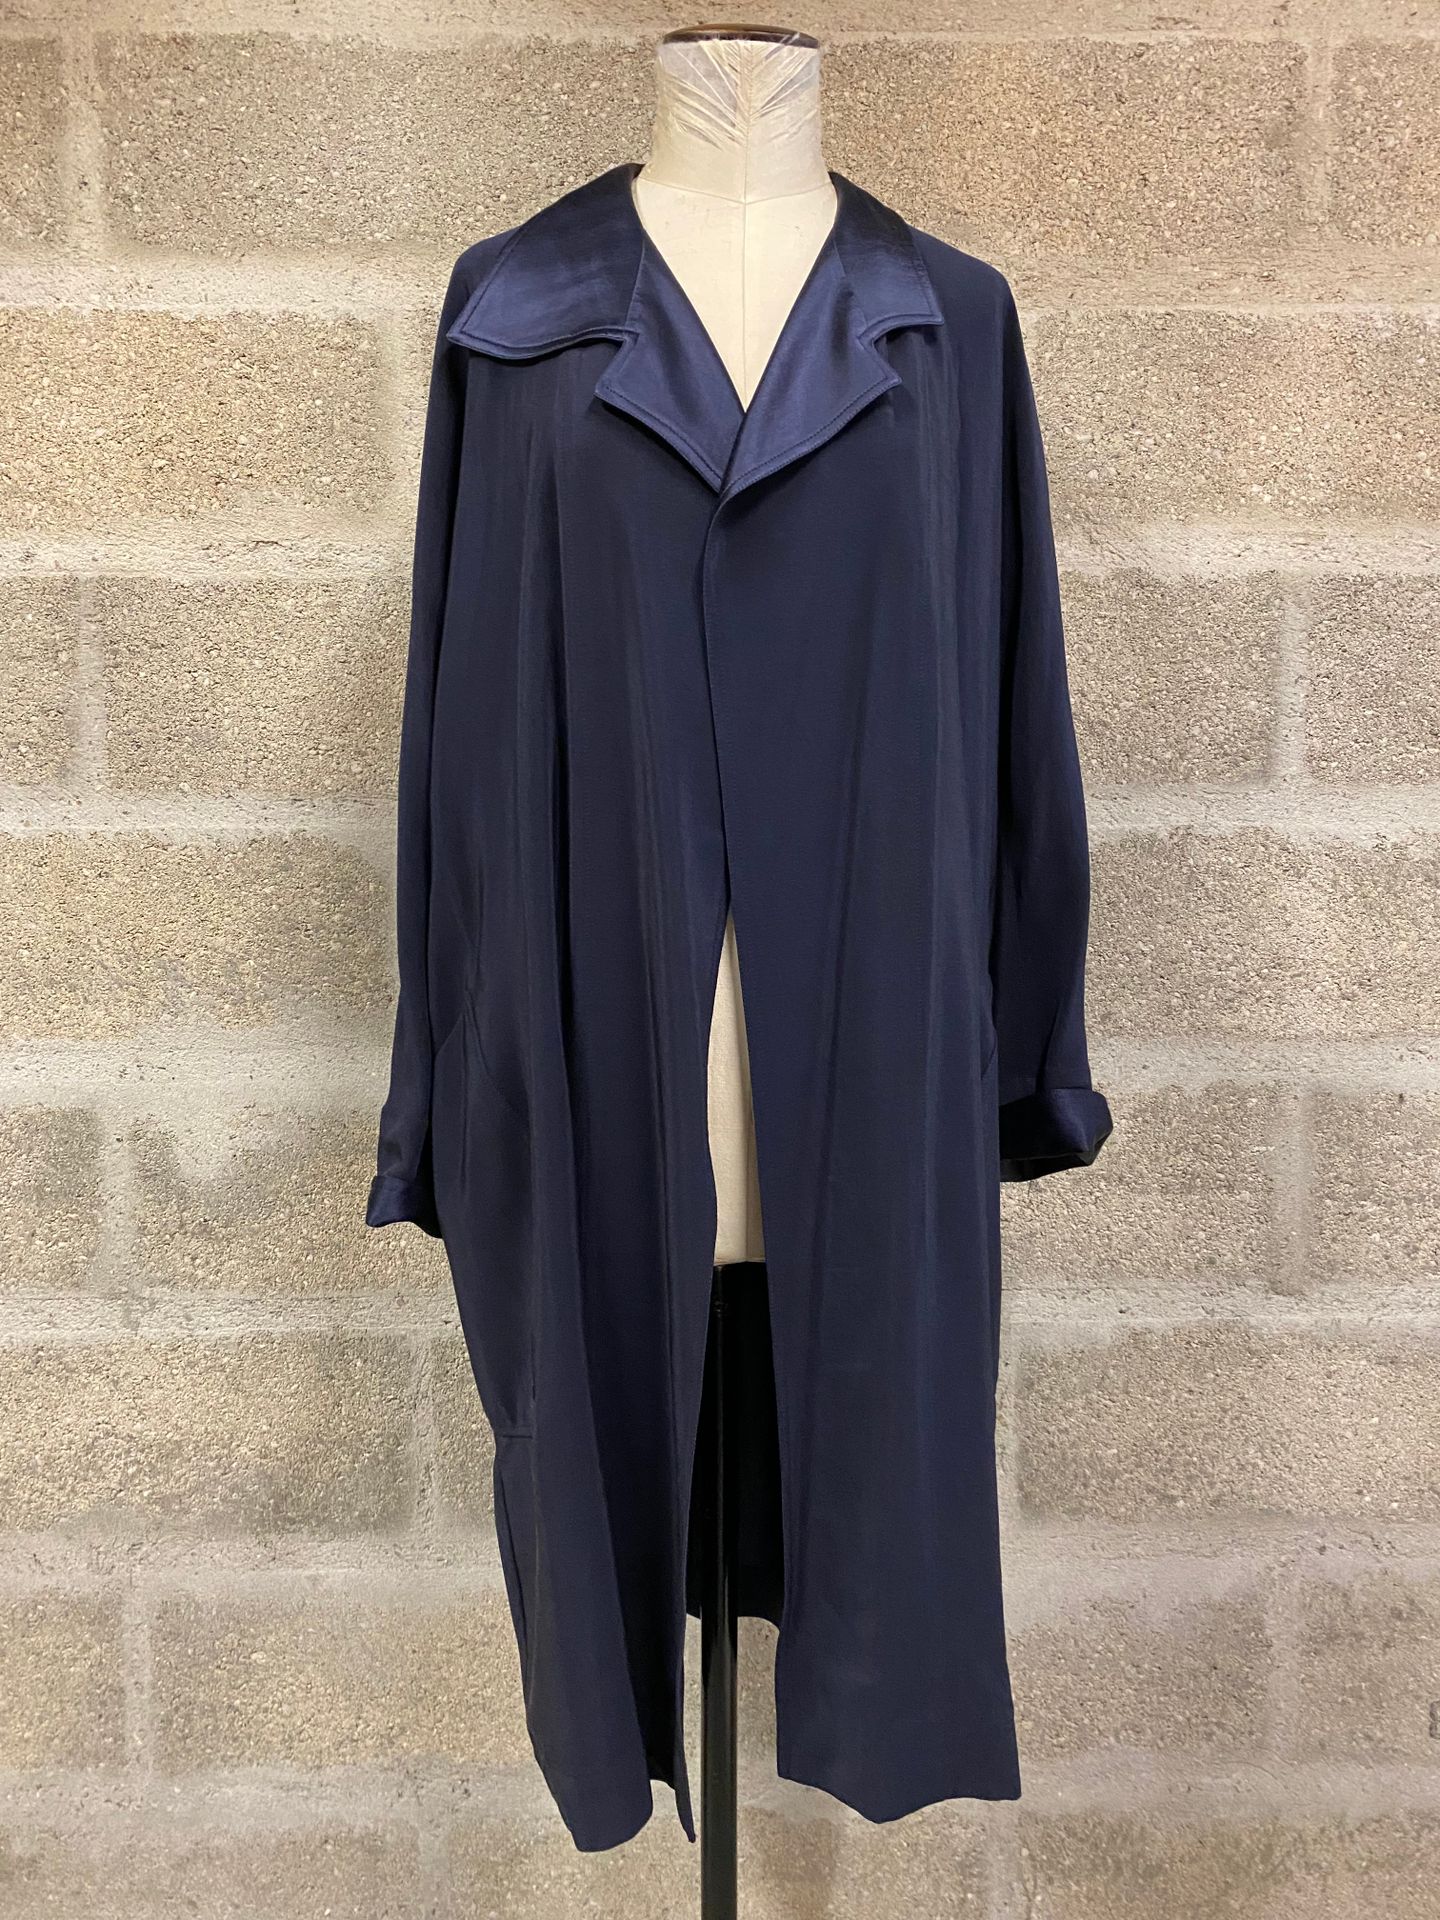 RENATA Loose-fitting wool and silk coat, navy blue with satin lapels 

Good cond&hellip;